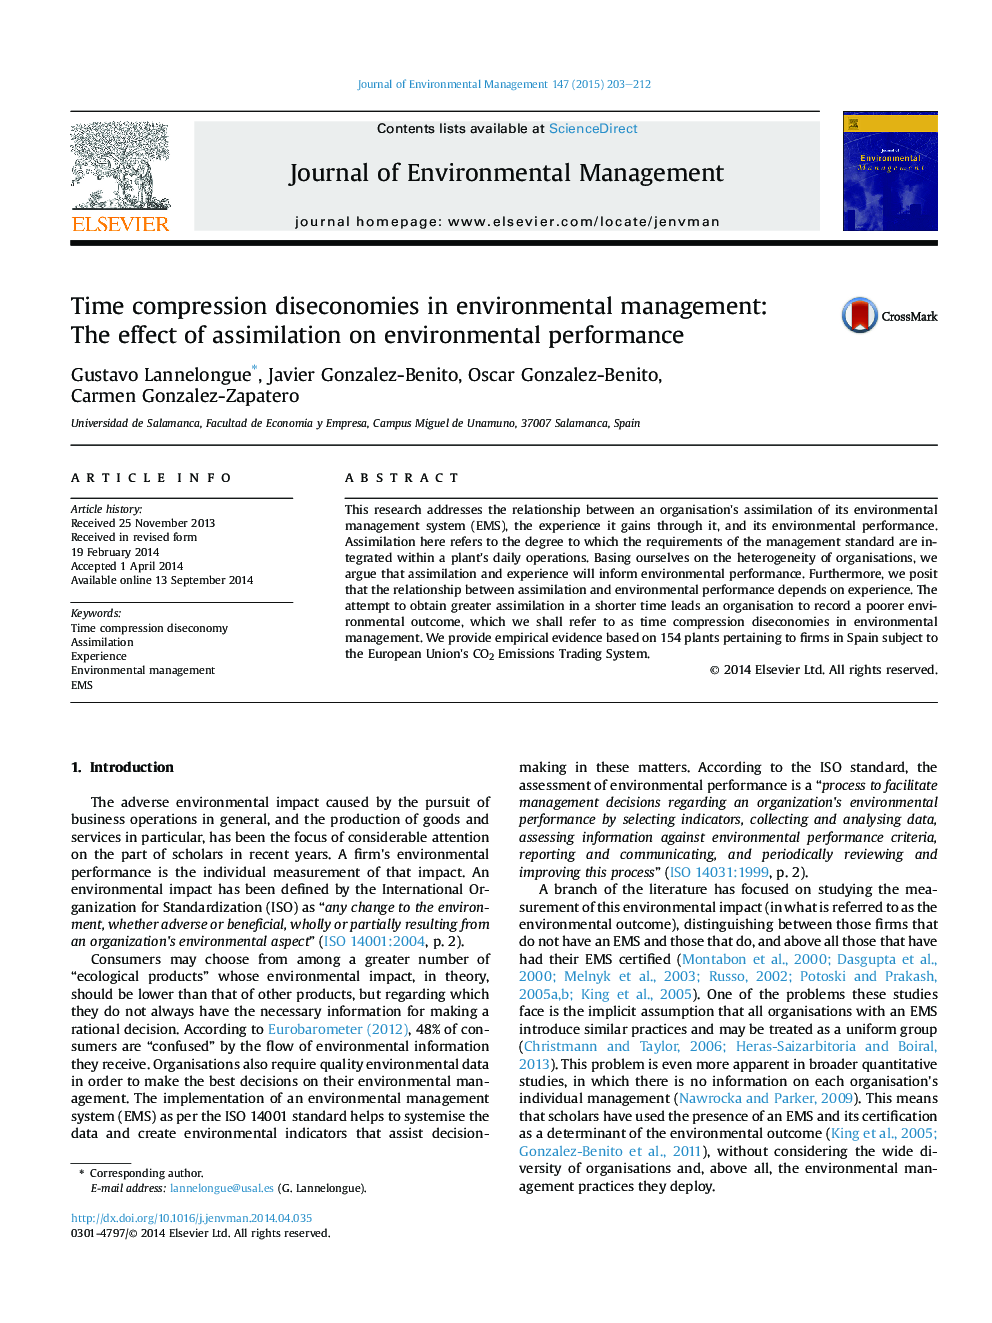 Time compression diseconomies in environmental management: The effect of assimilation on environmental performance